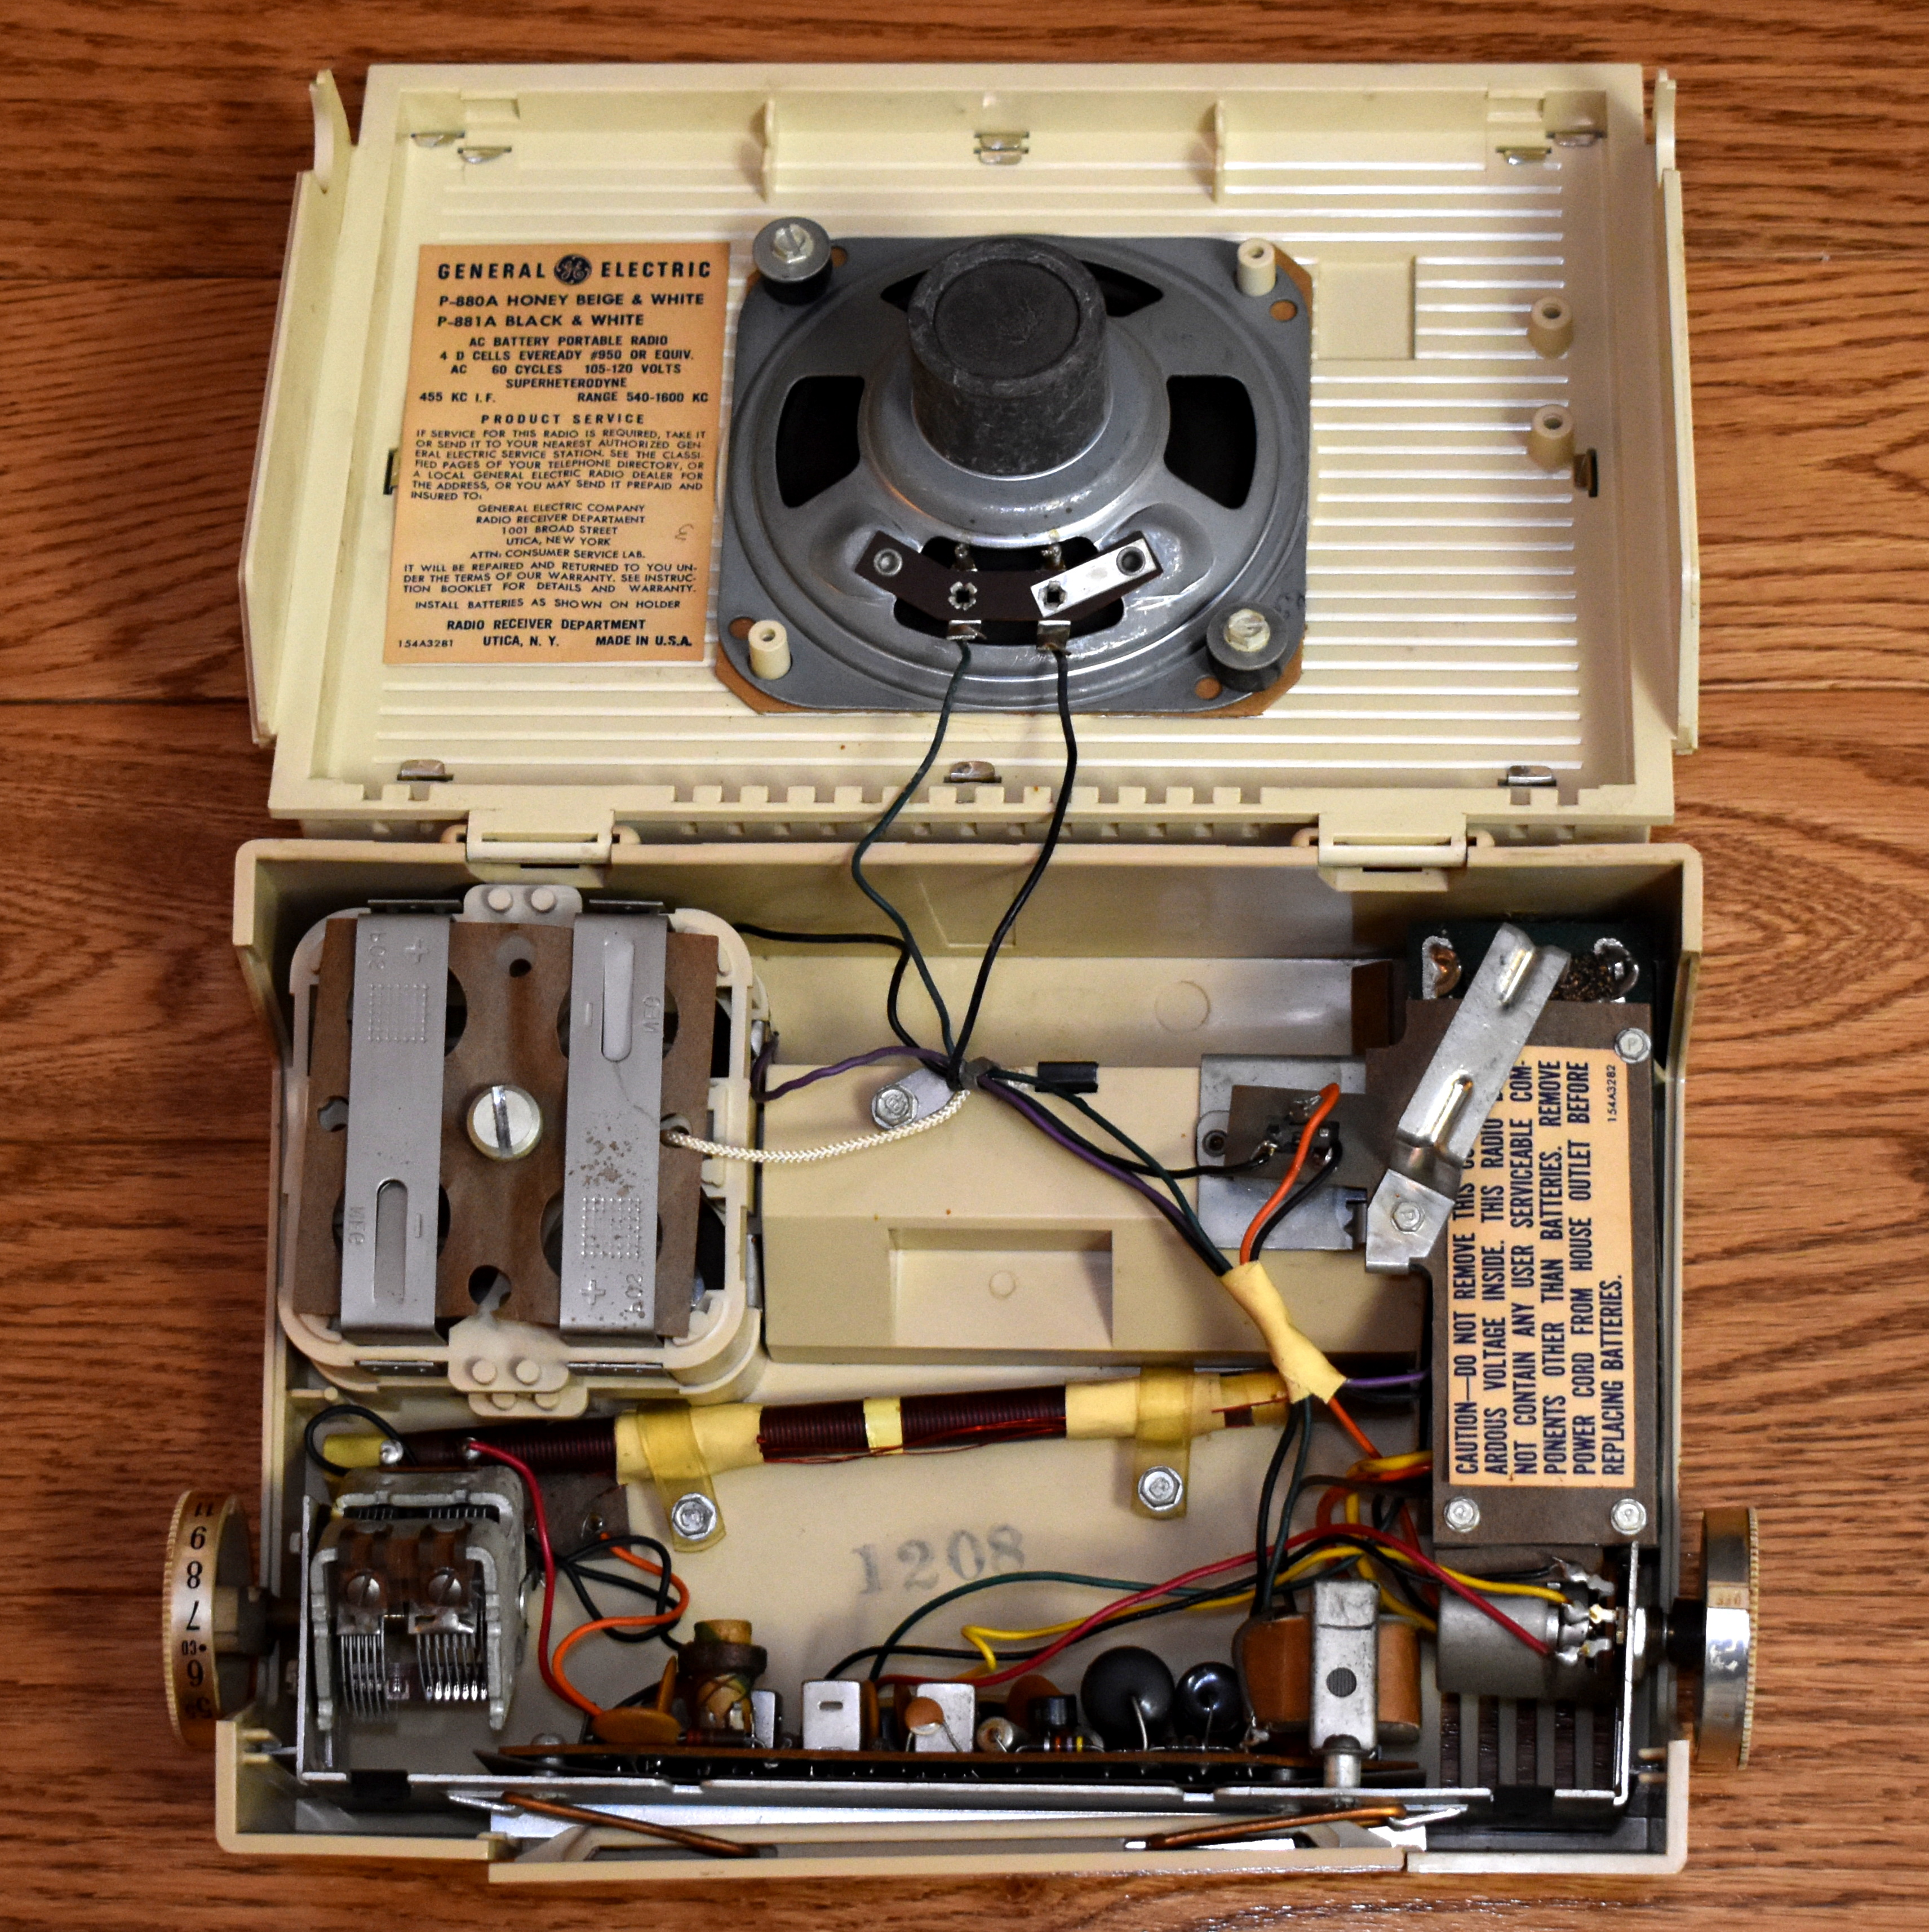 https://upload.wikimedia.org/wikipedia/commons/9/91/Vintage_General_Electric_Portable_Transistor_Radio_%28Chassis_View%29%2C_Model_P-880A_%28Honey_Wheat_%26_White_Case%29%2C_AM_Band%2C_5_Transistors%2C_Made_In_USA%2C_Circa_1961_-_1964_%2849389488186%29.jpg